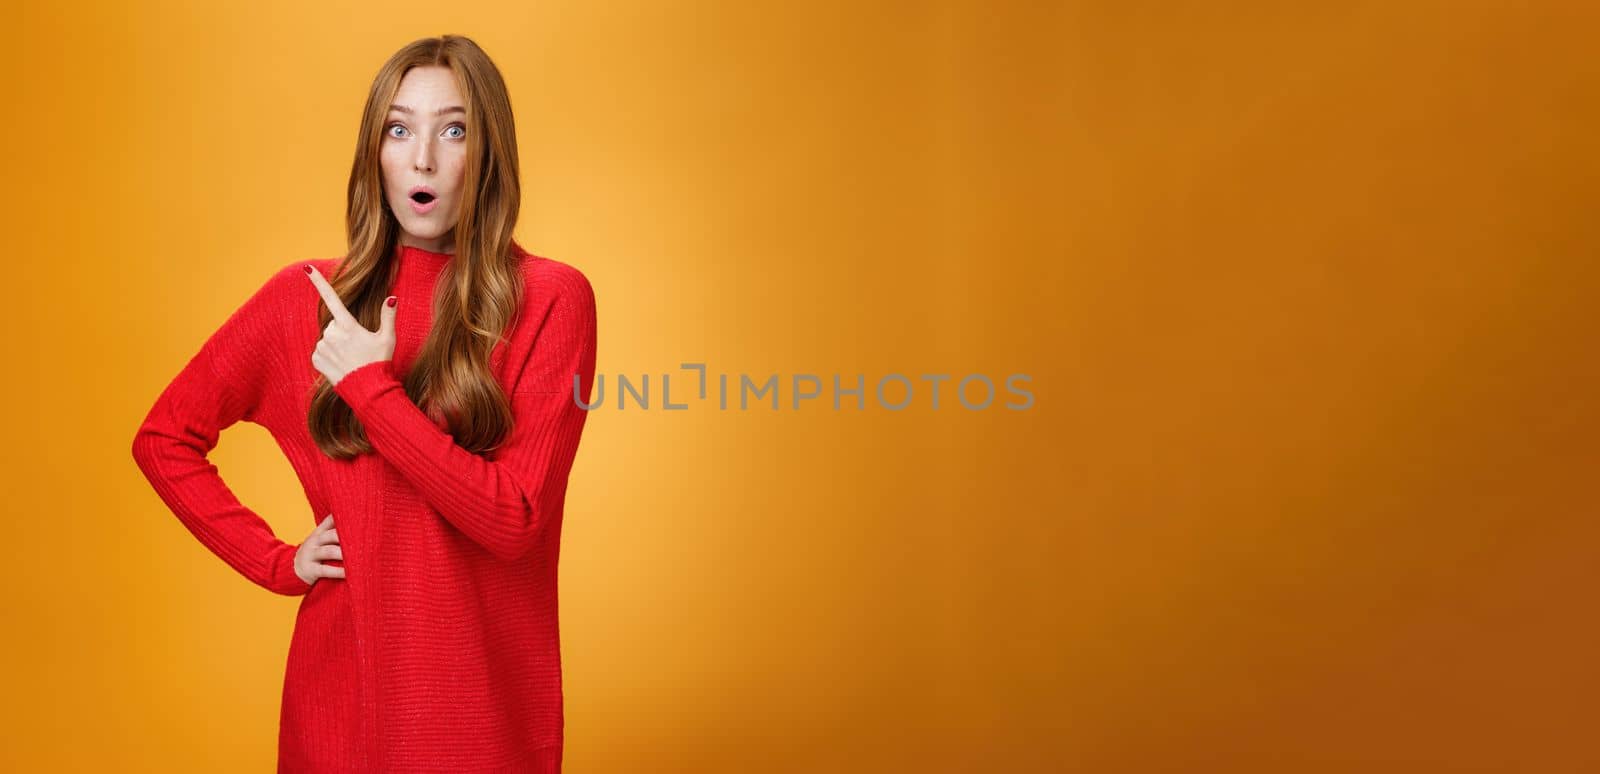 Lifestyle. Impressed redhead girl reacting to awesome unbeliavable promotion pointing behind or at upper left corner folding lips staring at camera astonished and surprised over orange background.